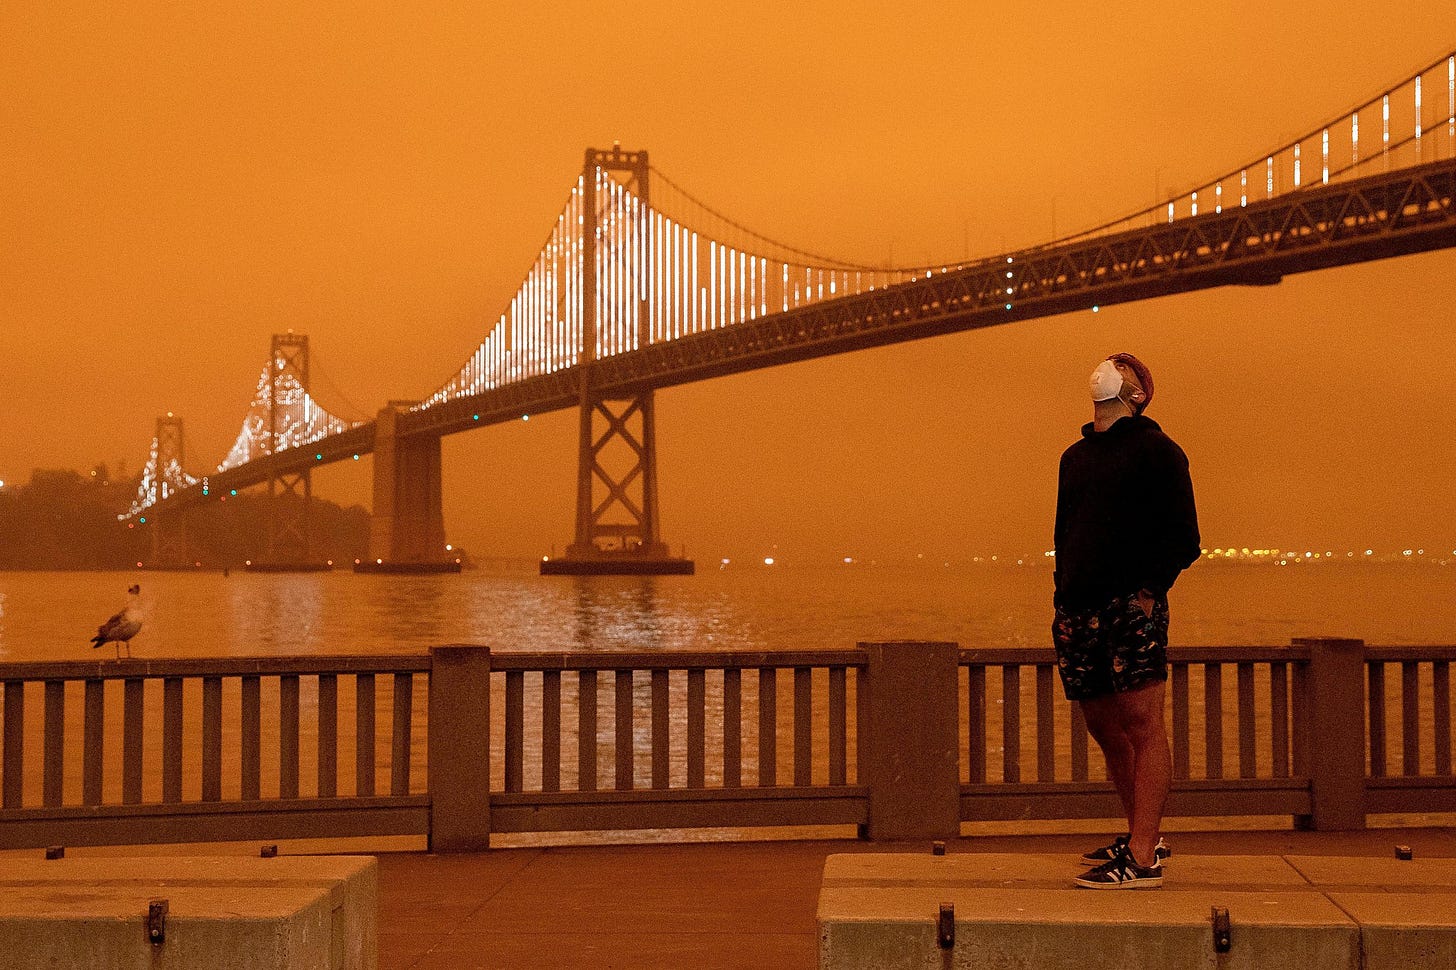 The orange skies have faded. But Orange Skies Day is forever